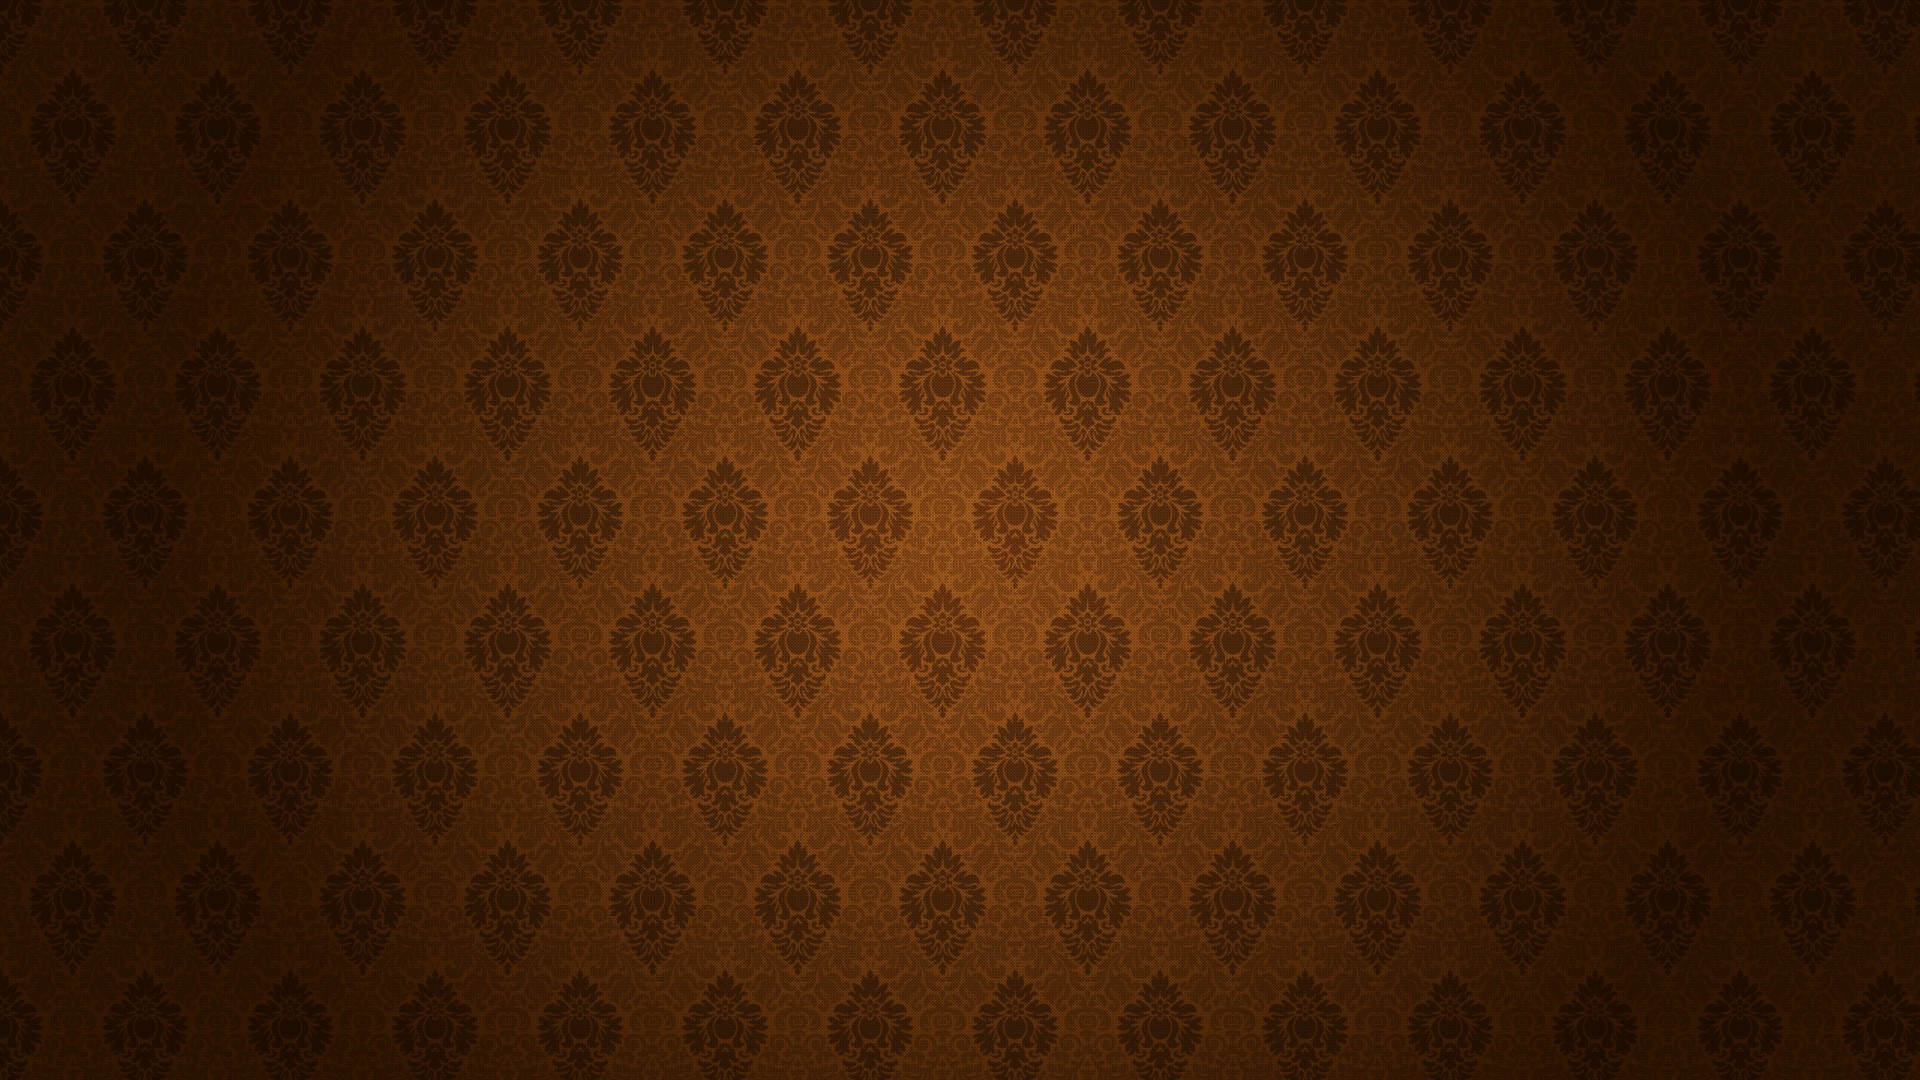 Minimalistic Orange Royal Simple Best Widescreen Background Awesome